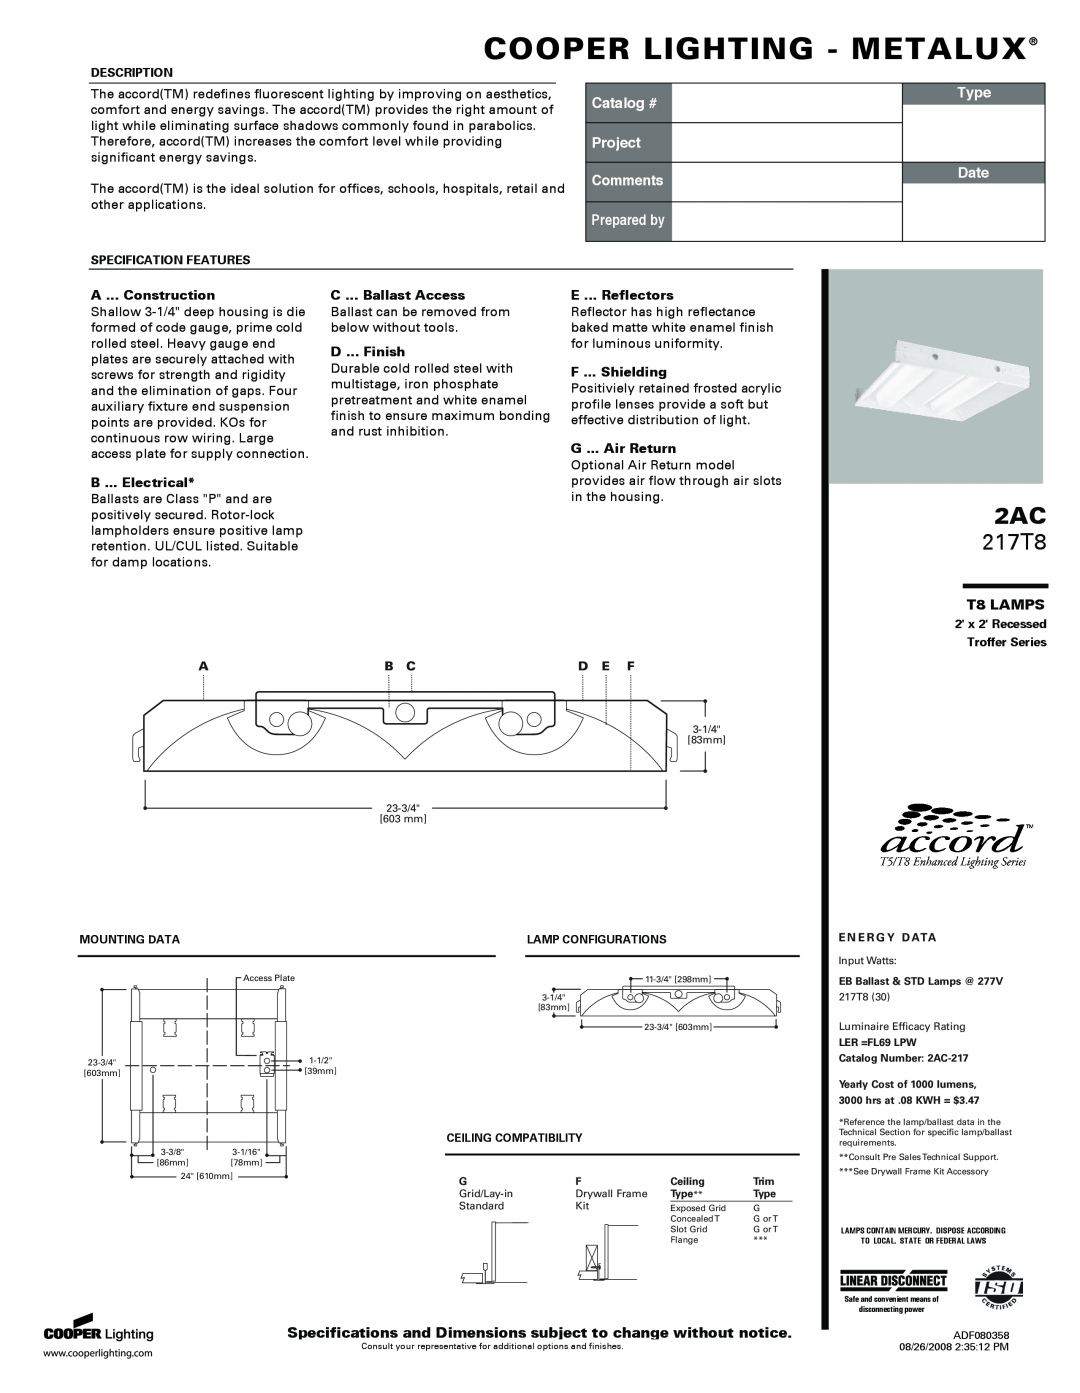 Cooper Lighting 217T8 specifications T8 LAMPS, Cooper Lighting - Metalux, Catalog #, Project Comments, Prepared by, Type 